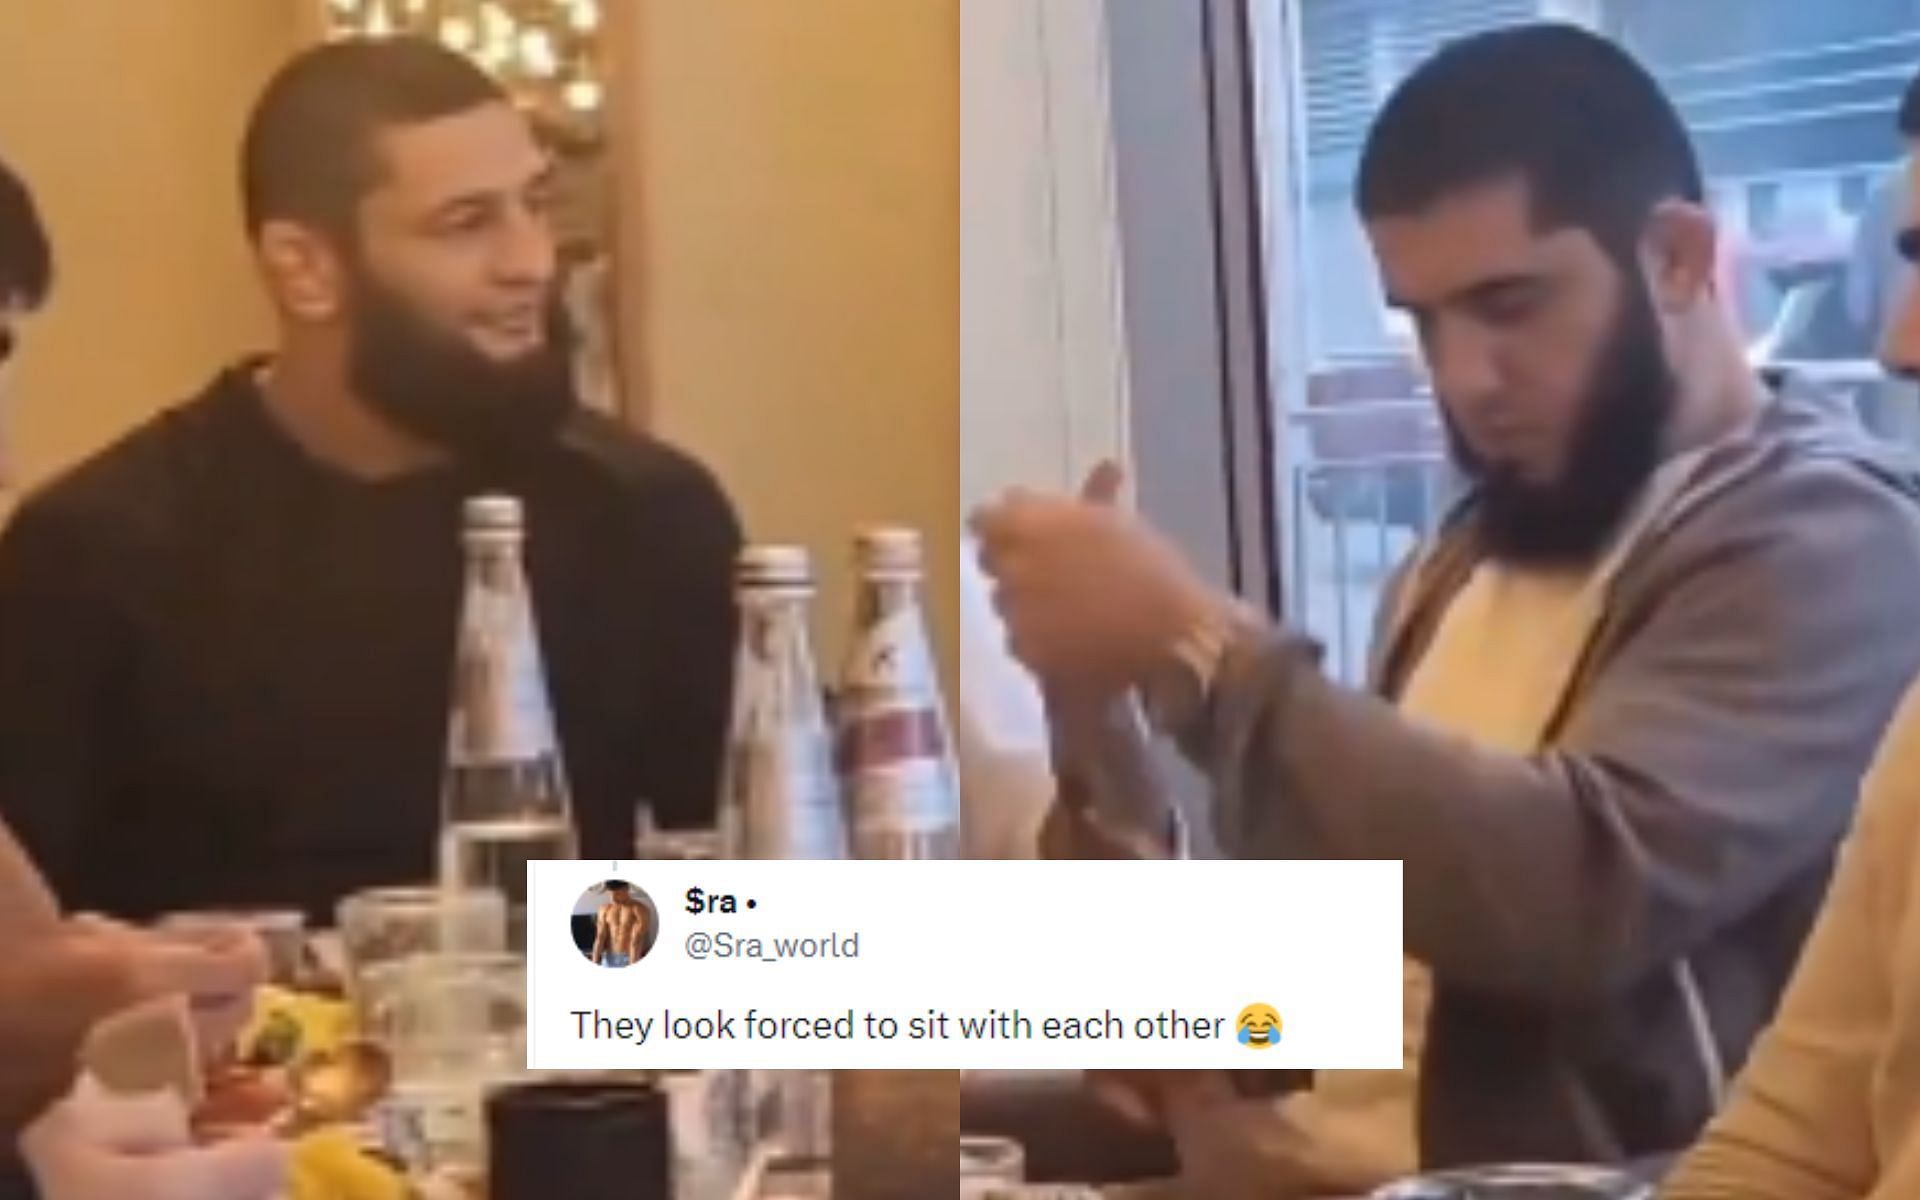 Fans reacted to a video of Khamzat Chimaev and Islam Makhachev [Pictured] eating lunch together [Image courtesy: @mma_orbit - X]